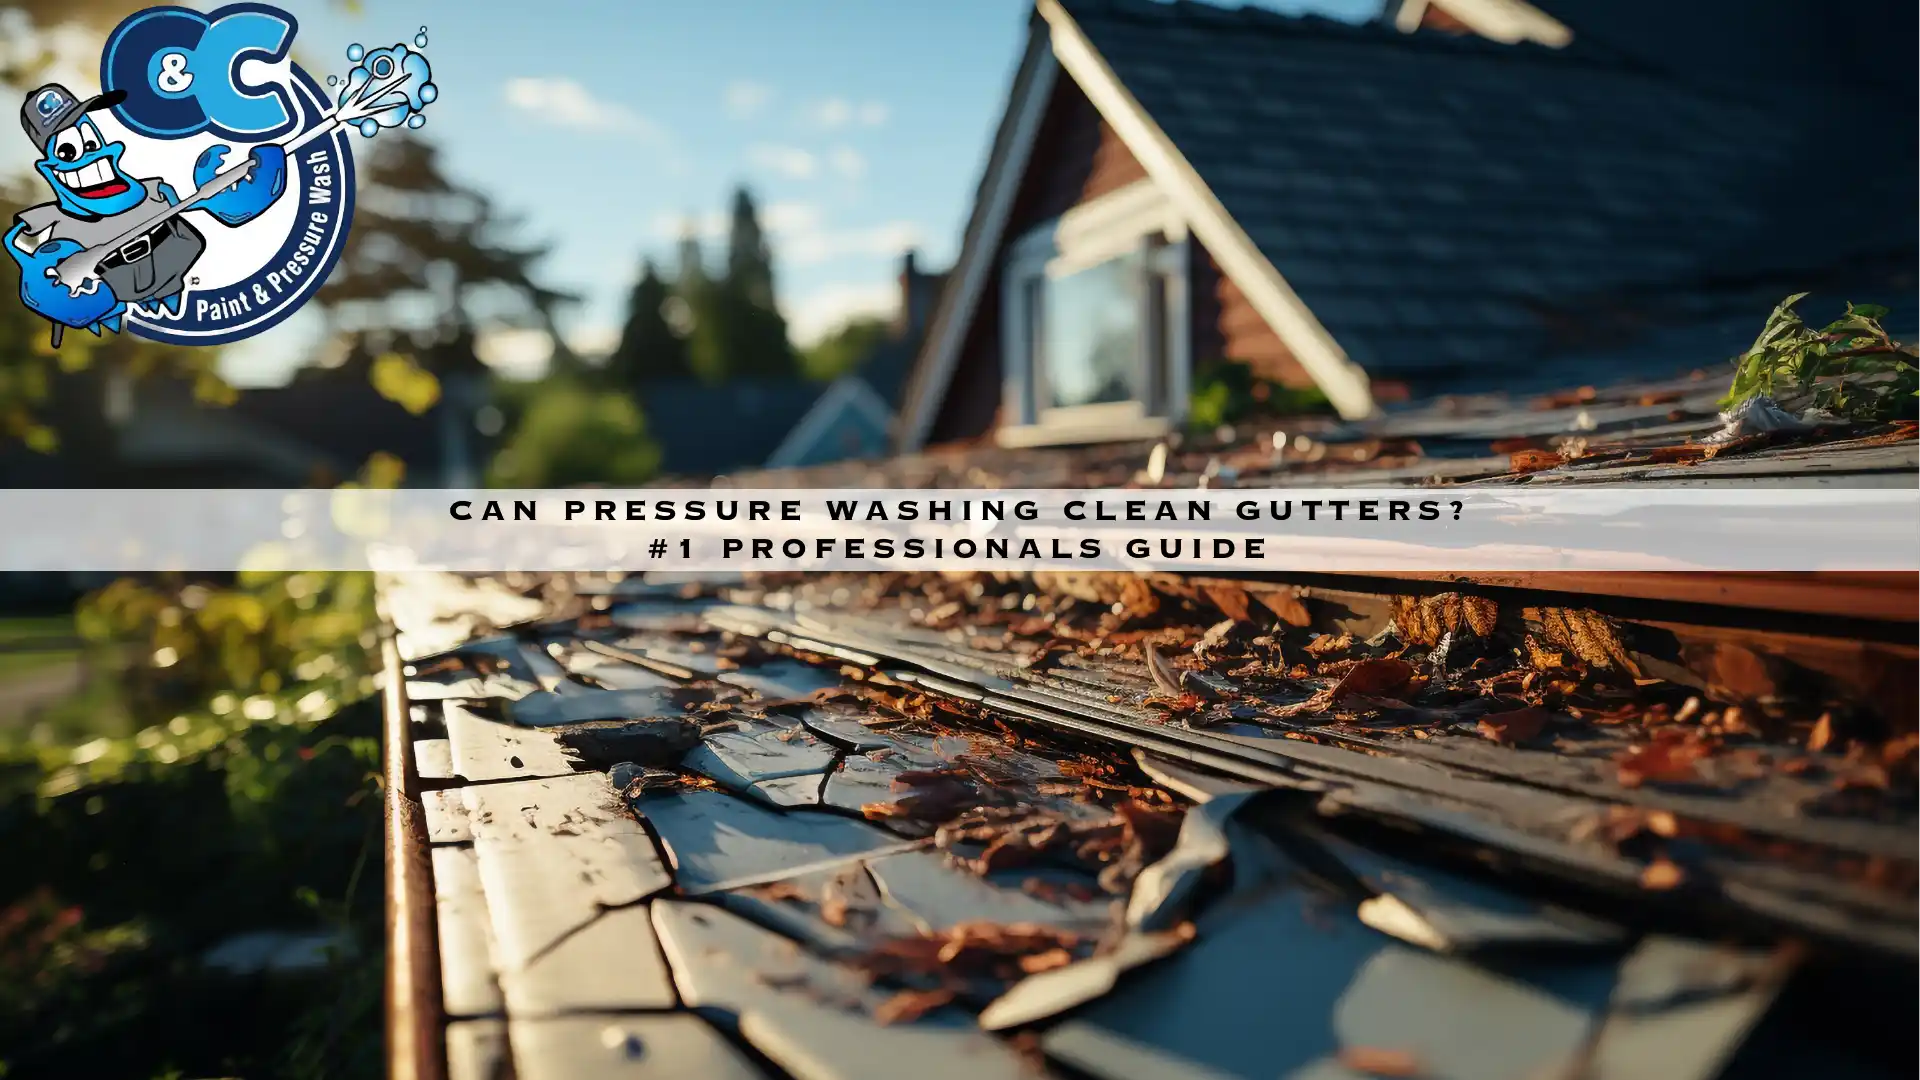 Can Pressure Washing Clean Gutters? #1 Professionals Guide